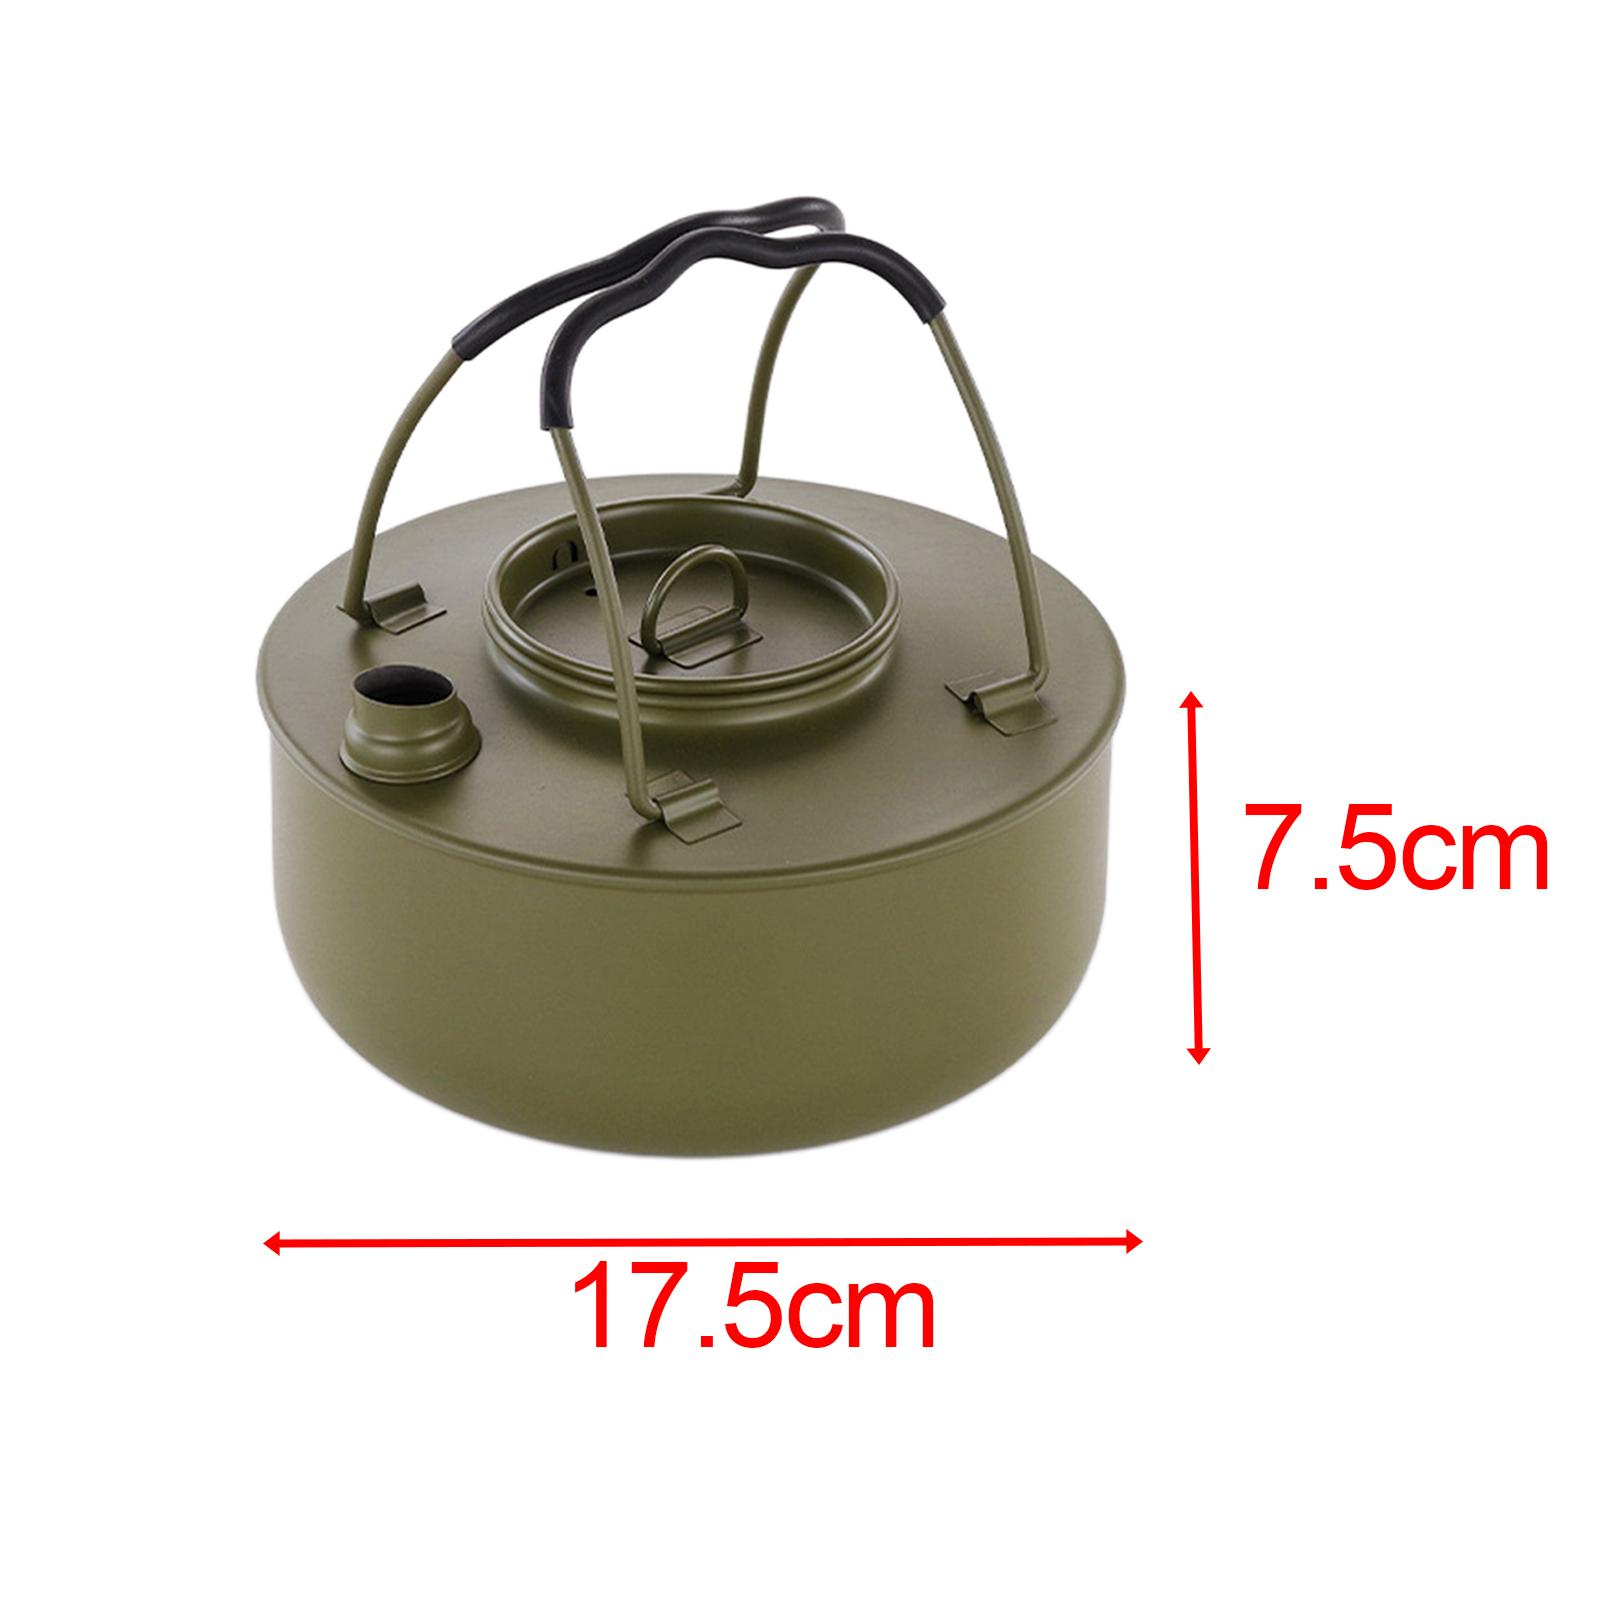 1.5L Camping Tea Kettle, Campfire Kettle Teapot for Camping Picnic Backpacking Outdoor, Size: 17.5cmx7.5cm, Other